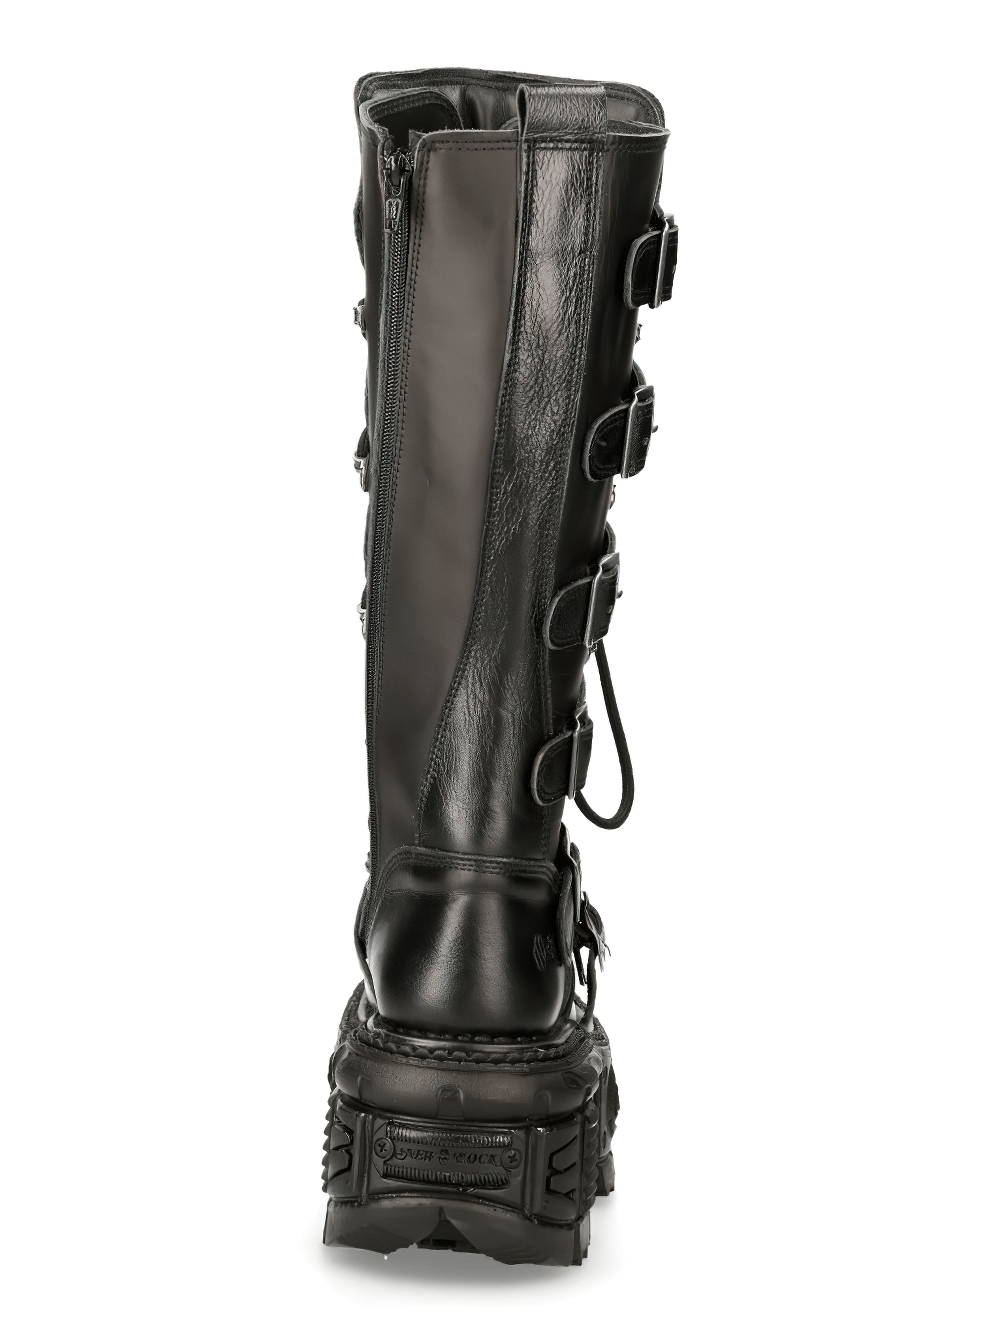 NEW ROCK Black Leather Knee-High Boots with Buckles